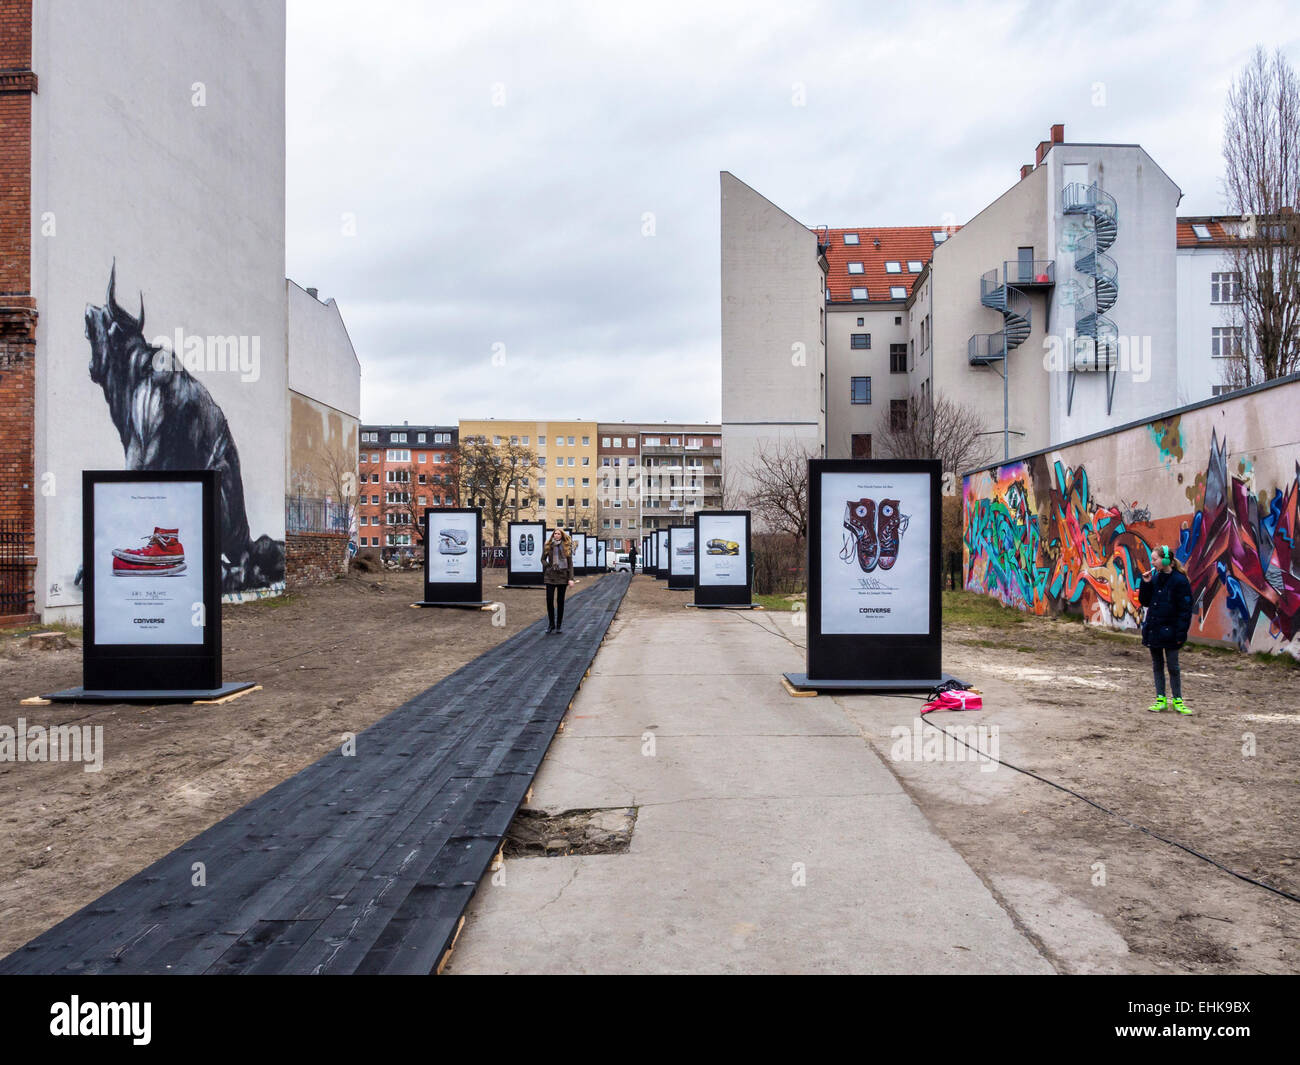 Berlin Converse Trainers Advertisement, Chucks shoes 'made for you' campaign catwalk and street art murals Stock Photo